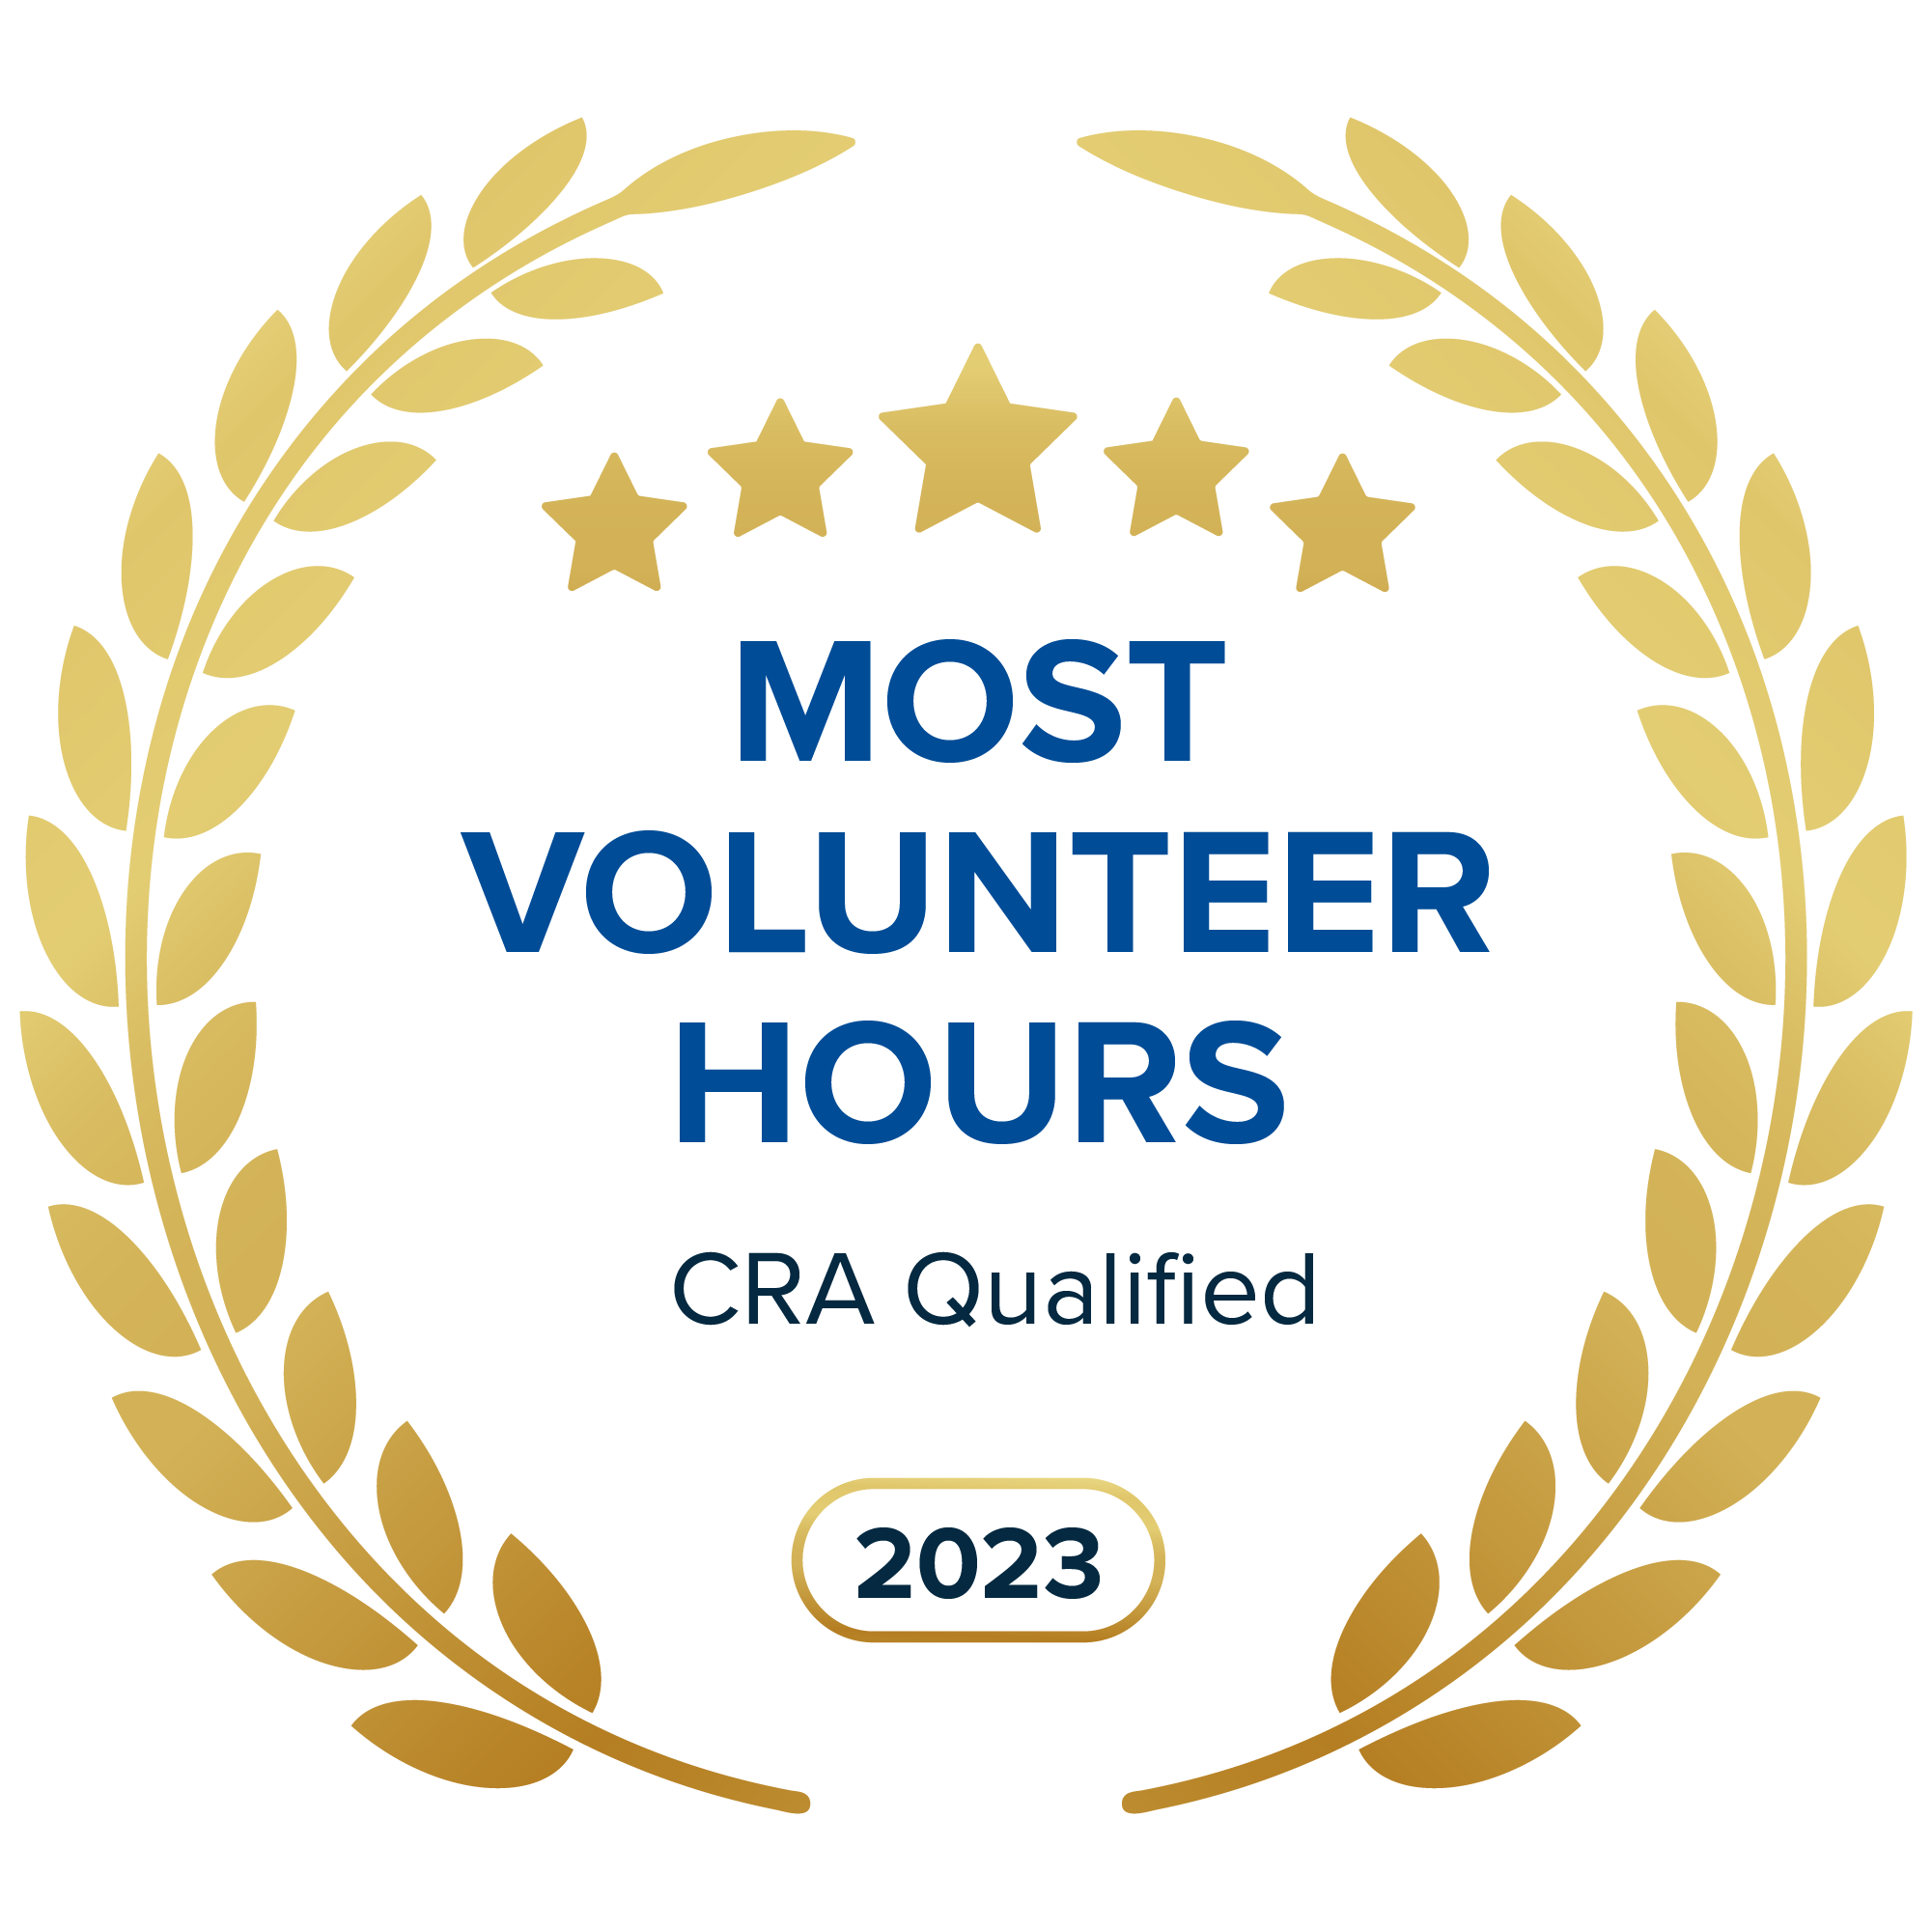 Most volunteer hours that are CRA qualified